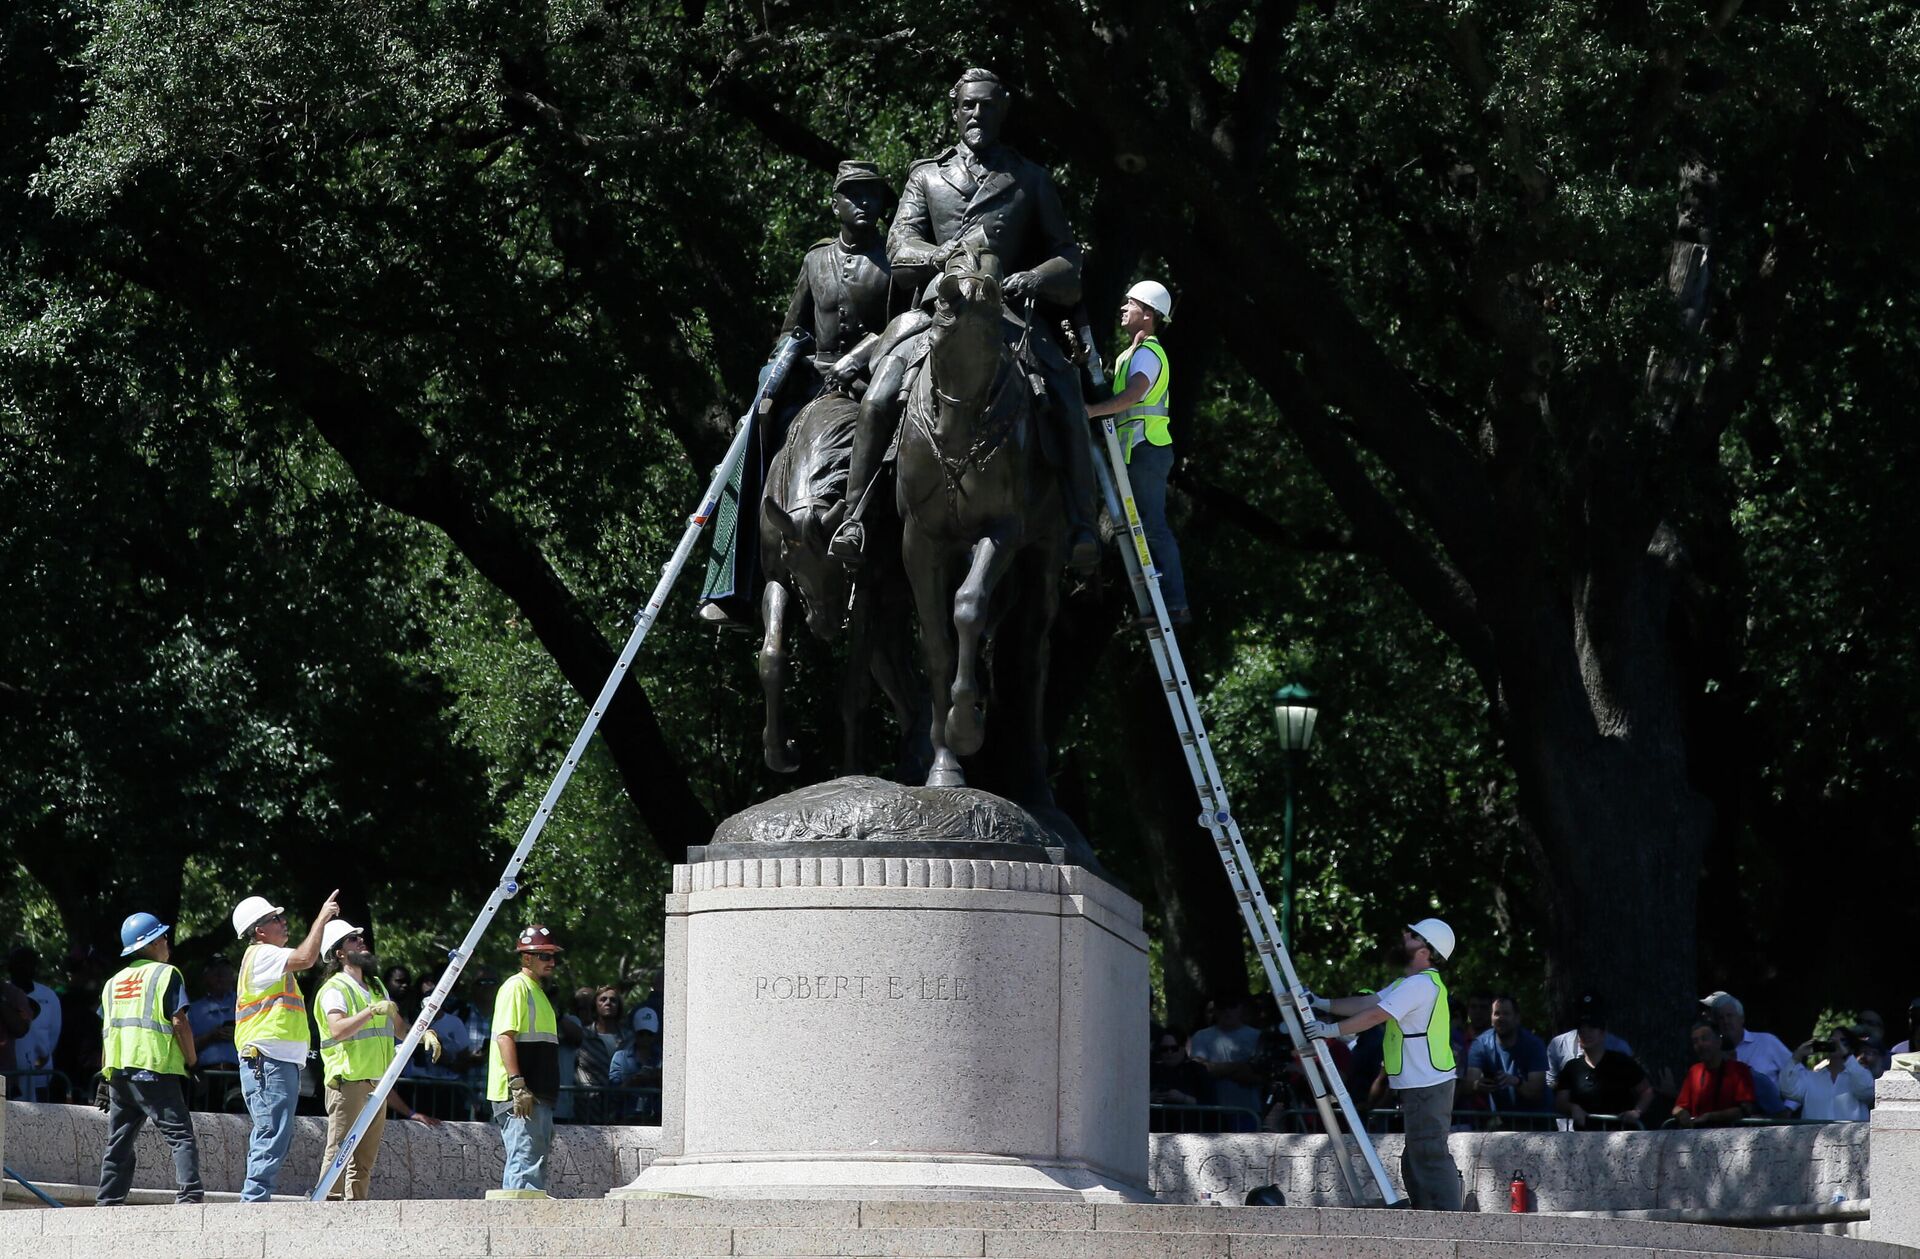 Workers inspect a statue of Robert E. Lee in a public park in Dallas, Wednesday, Sept. 6, 2017.  - Sputnik International, 1920, 10.02.2024